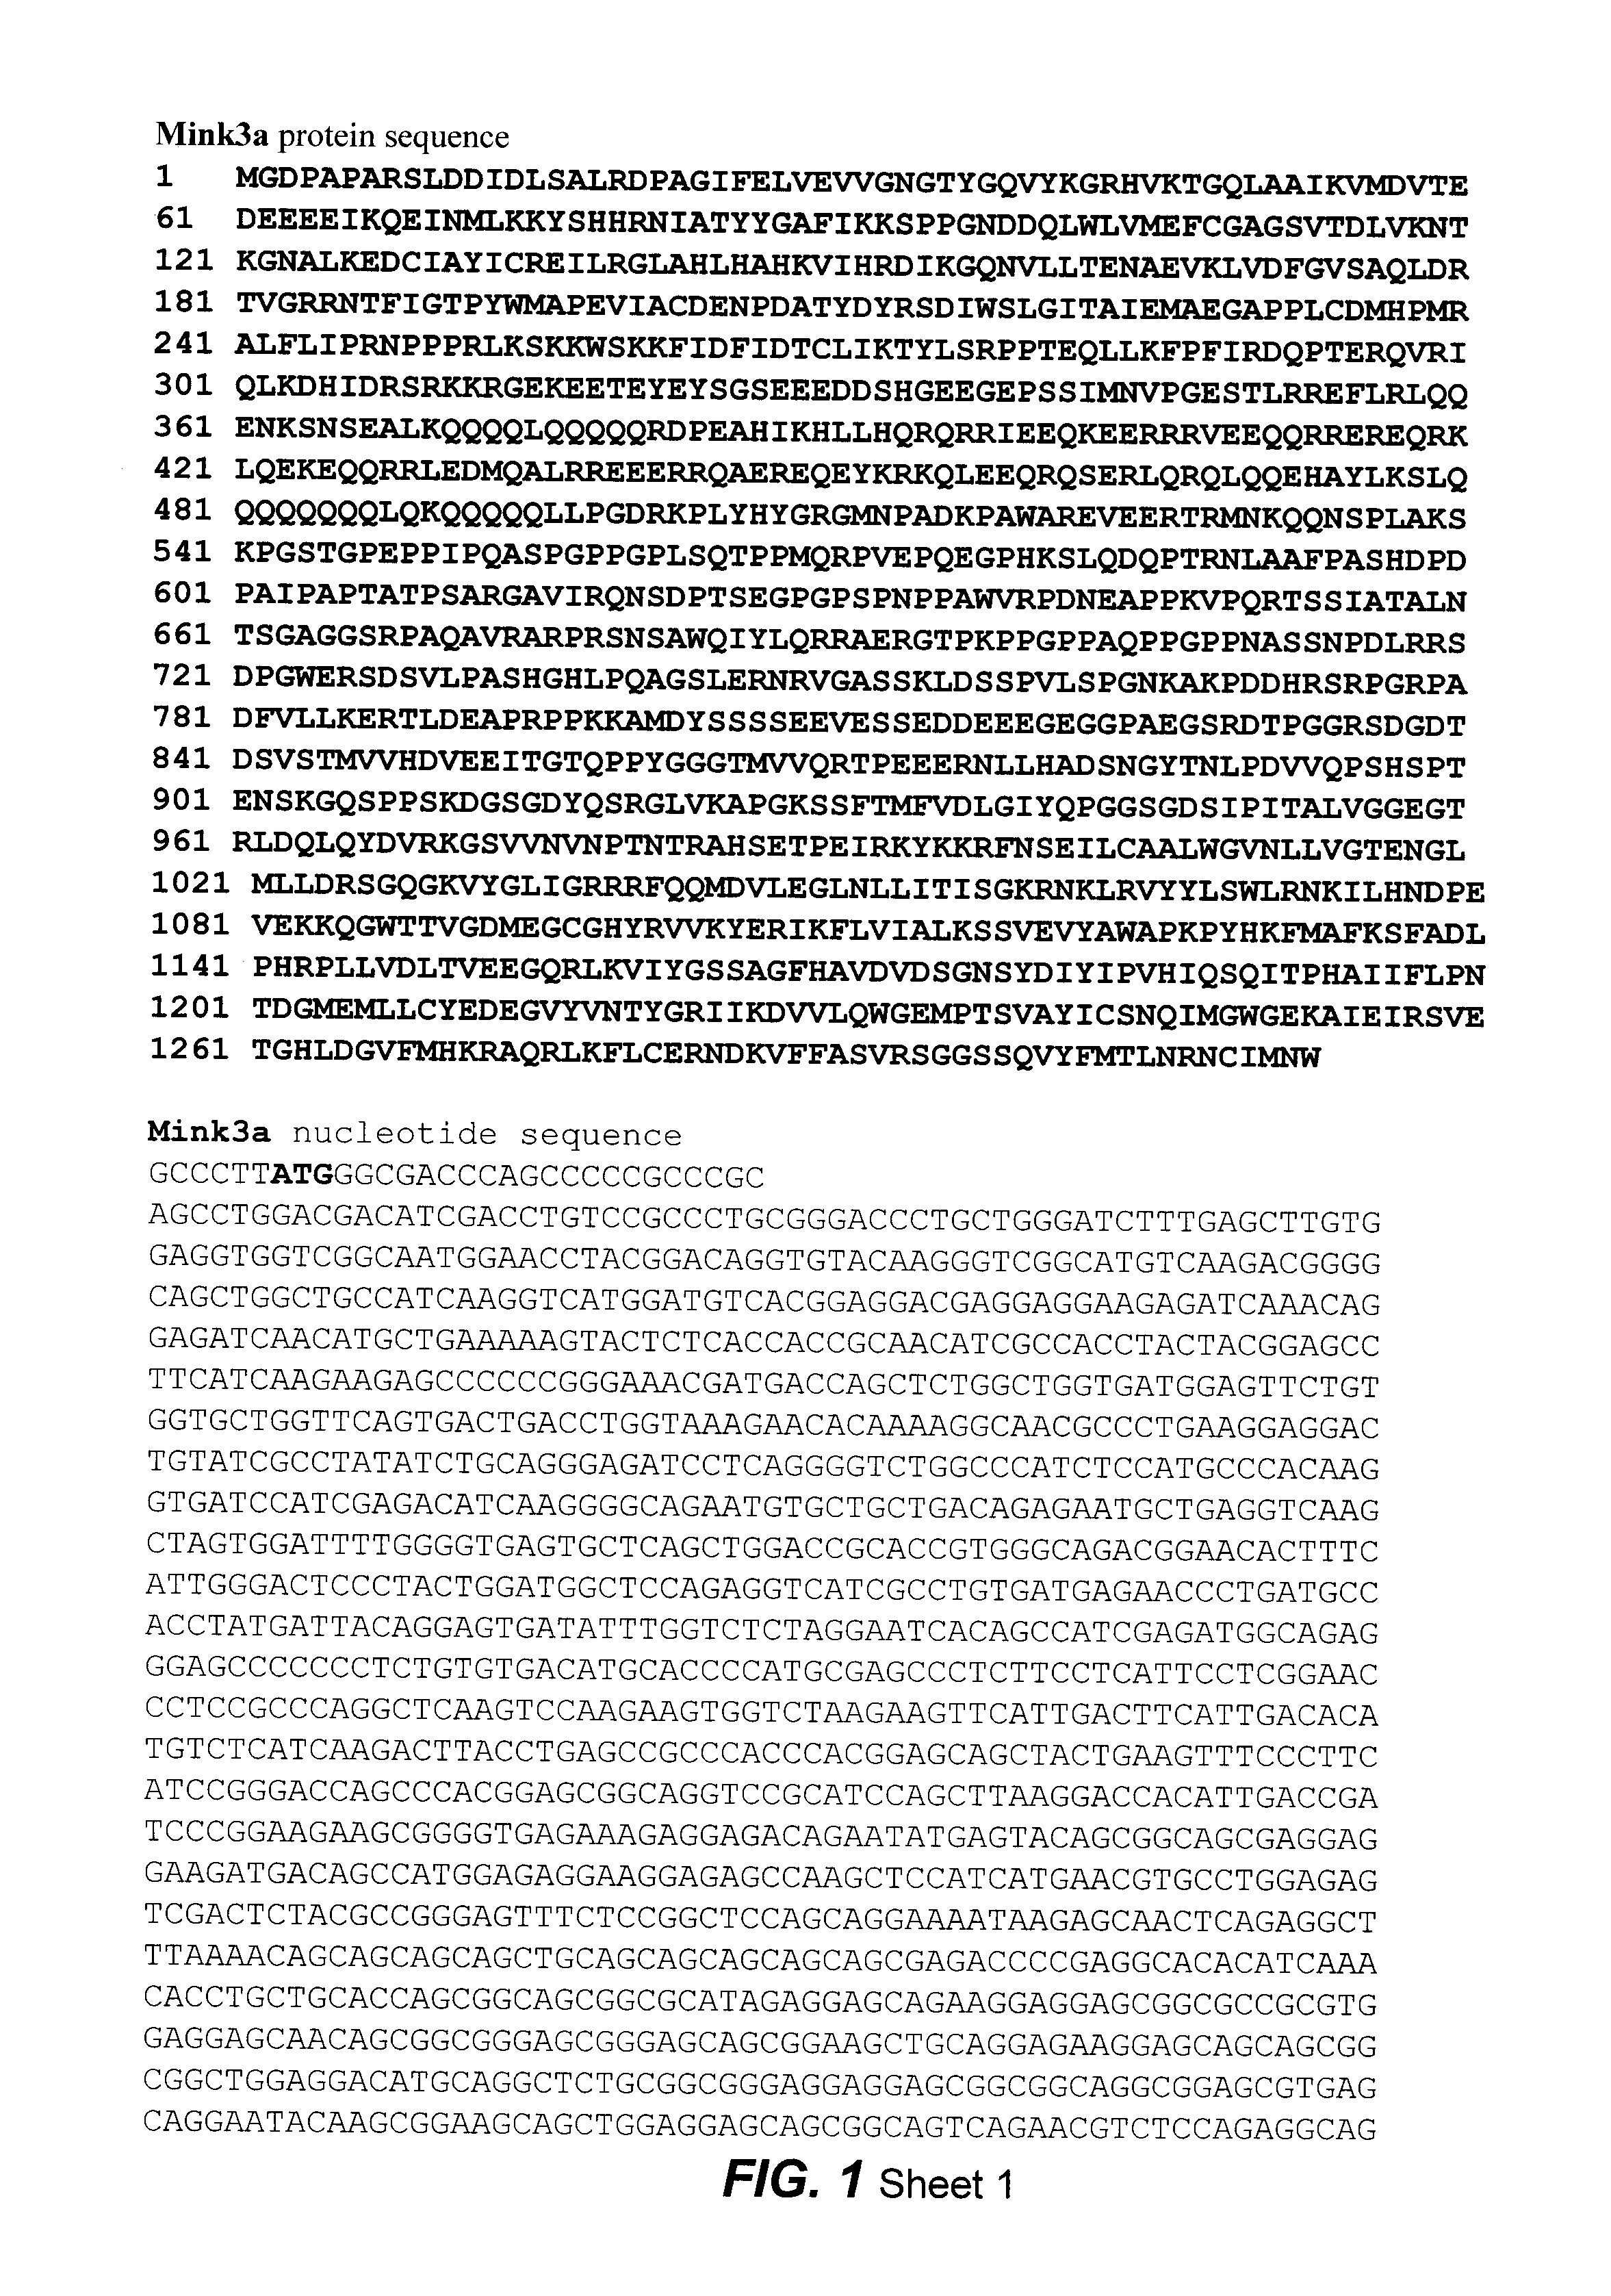 Germinal center kinase proteins, compositions and methods of use